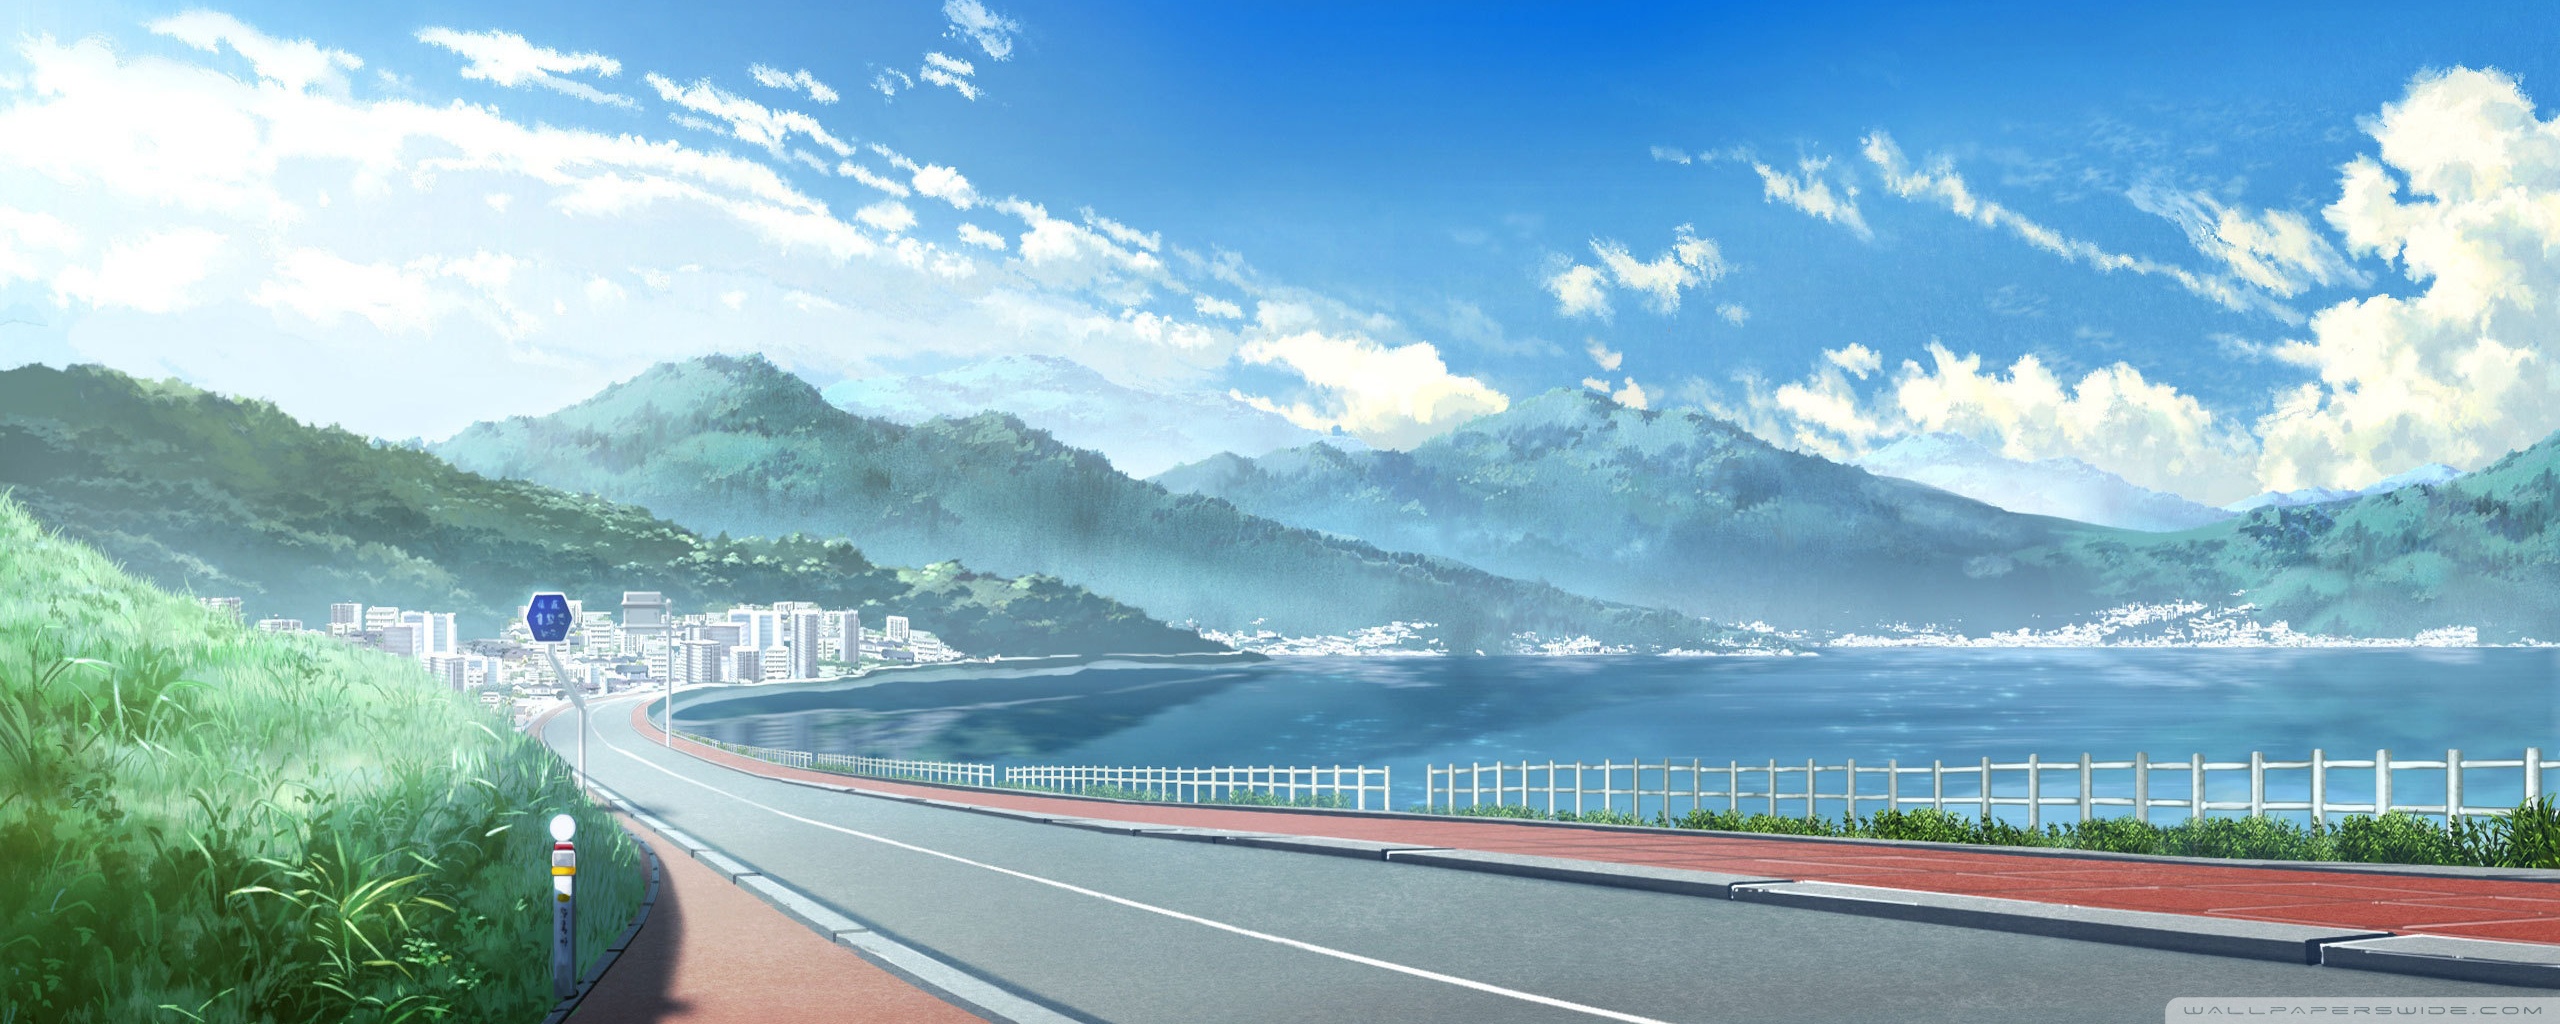 anime landscape wallpapers #14